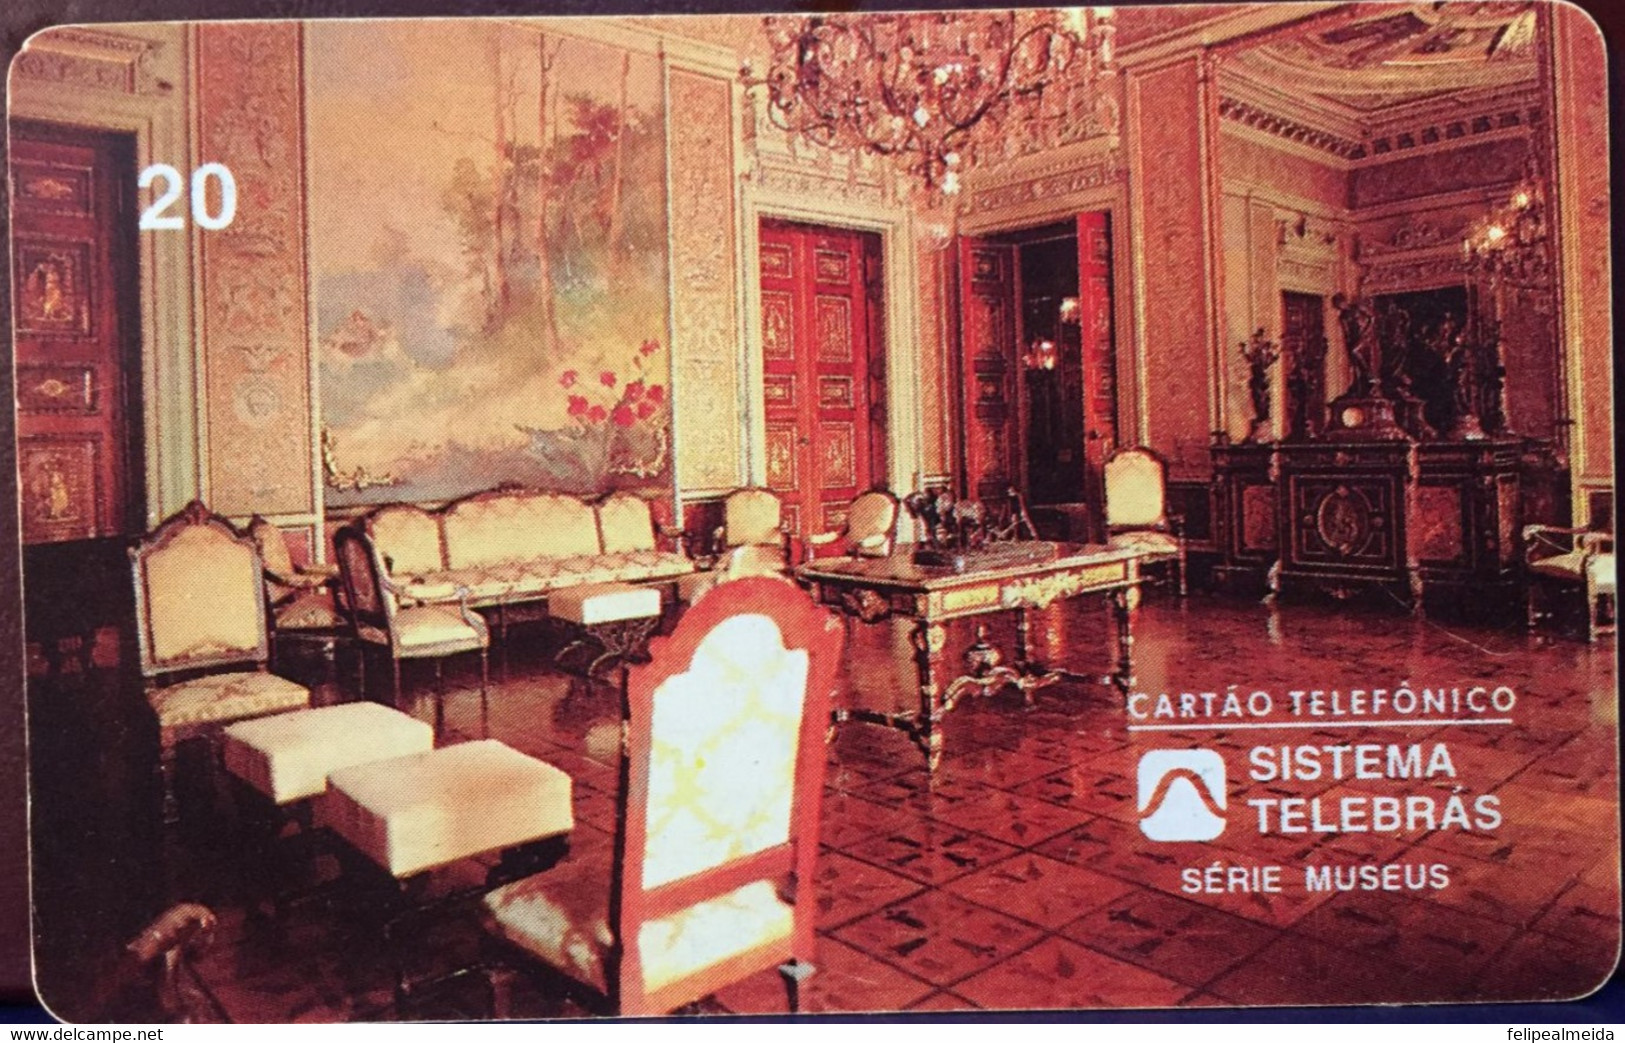 Phone Card Manufactured By Telebras In 1996 - Series Museums - Museum Of The Republic Of Rio De Janeiro - Venetian H - Culture